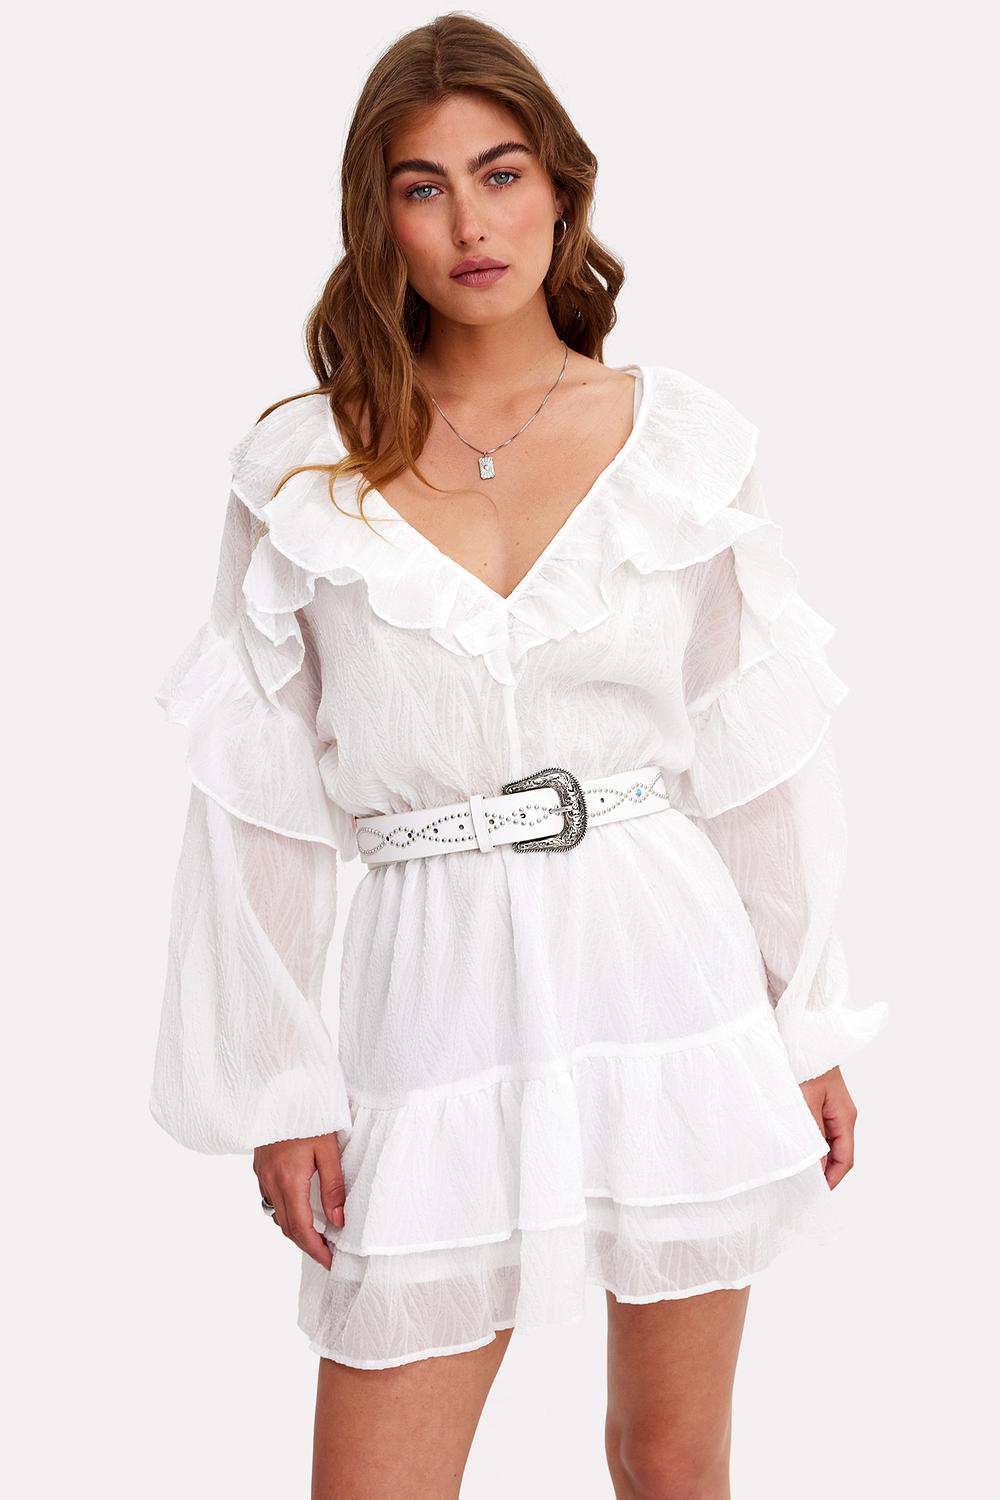 Offwhite dress with ruffles